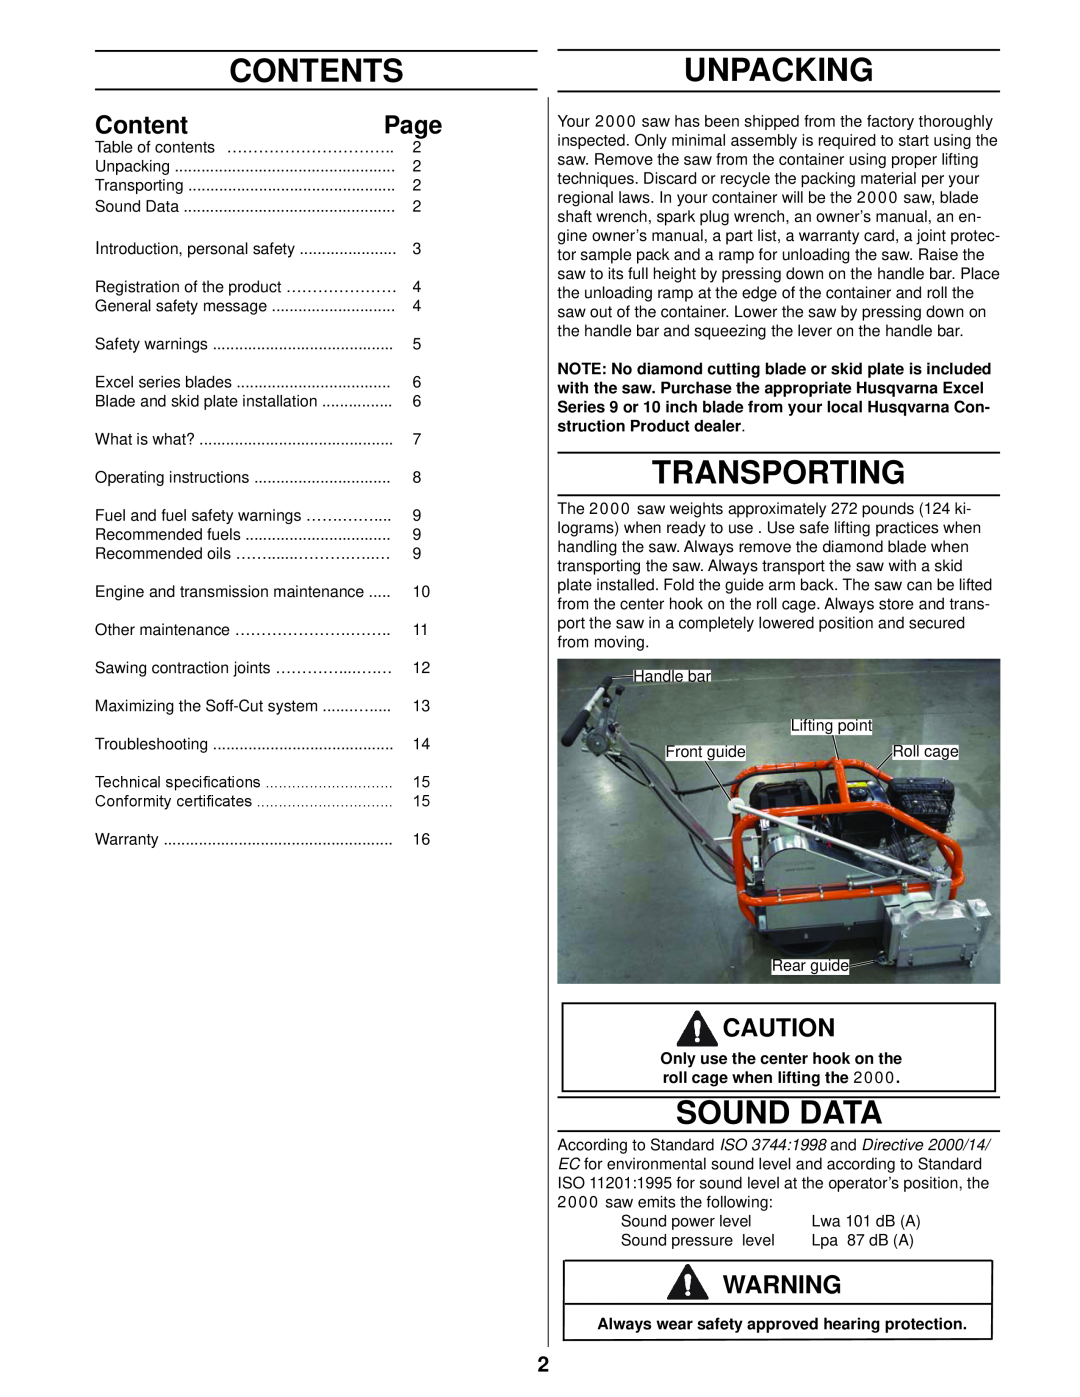 Husqvarna 2000 manual Contents, Unpacking, Transporting, Sound Data, Page, Always wear safety approved hearing protection 